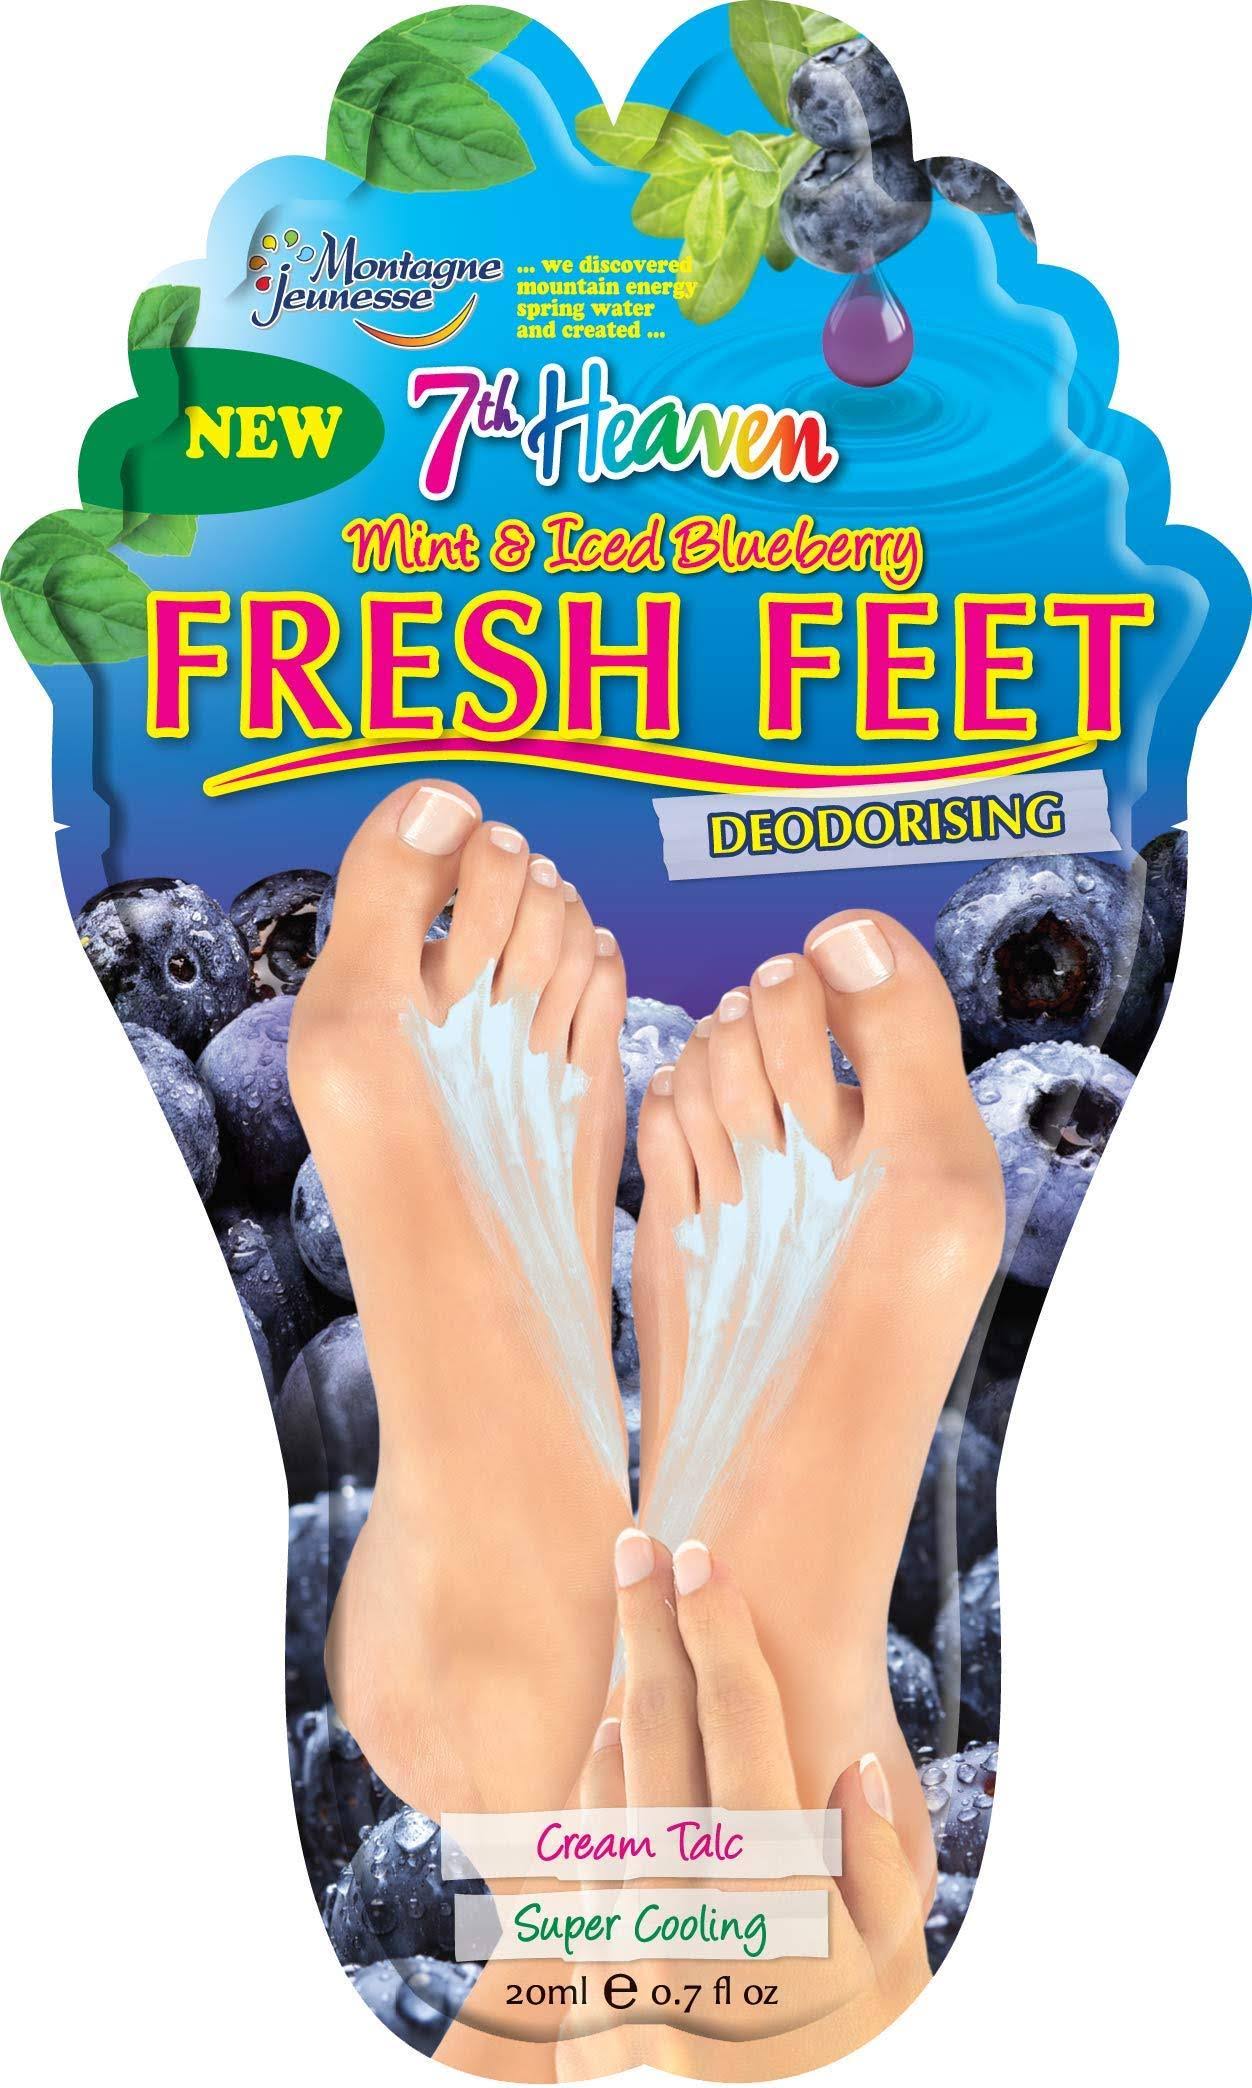 7th Heaven Fresh Feet Cooling Deodorizing Cream - Mint and Iced Blueberry, 20ml